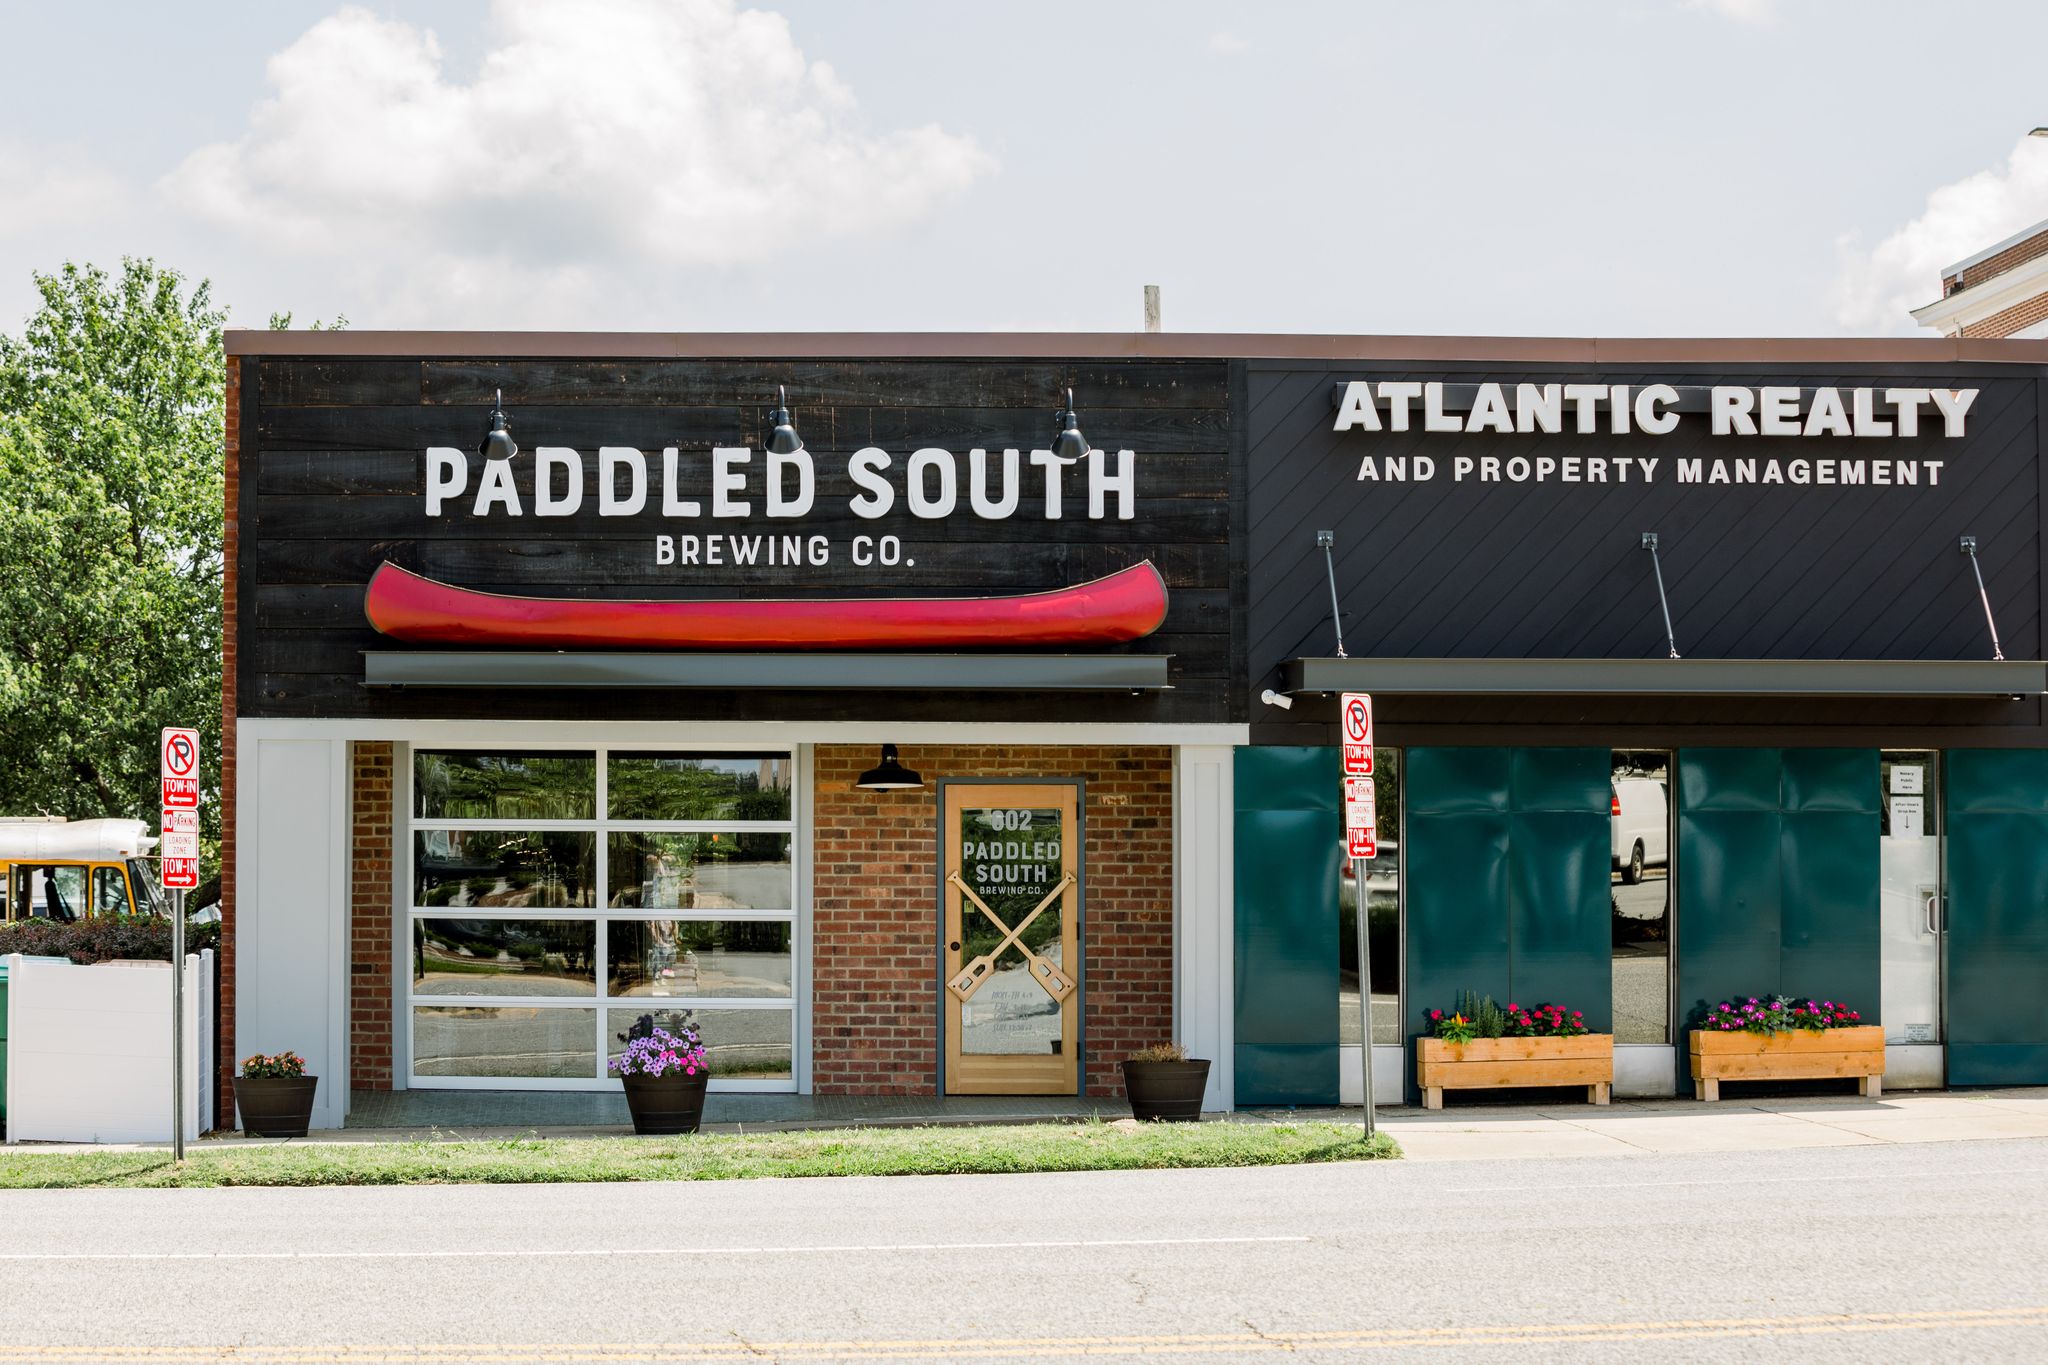 The exterior of Paddled South Brewing Co., in High Point, NC.